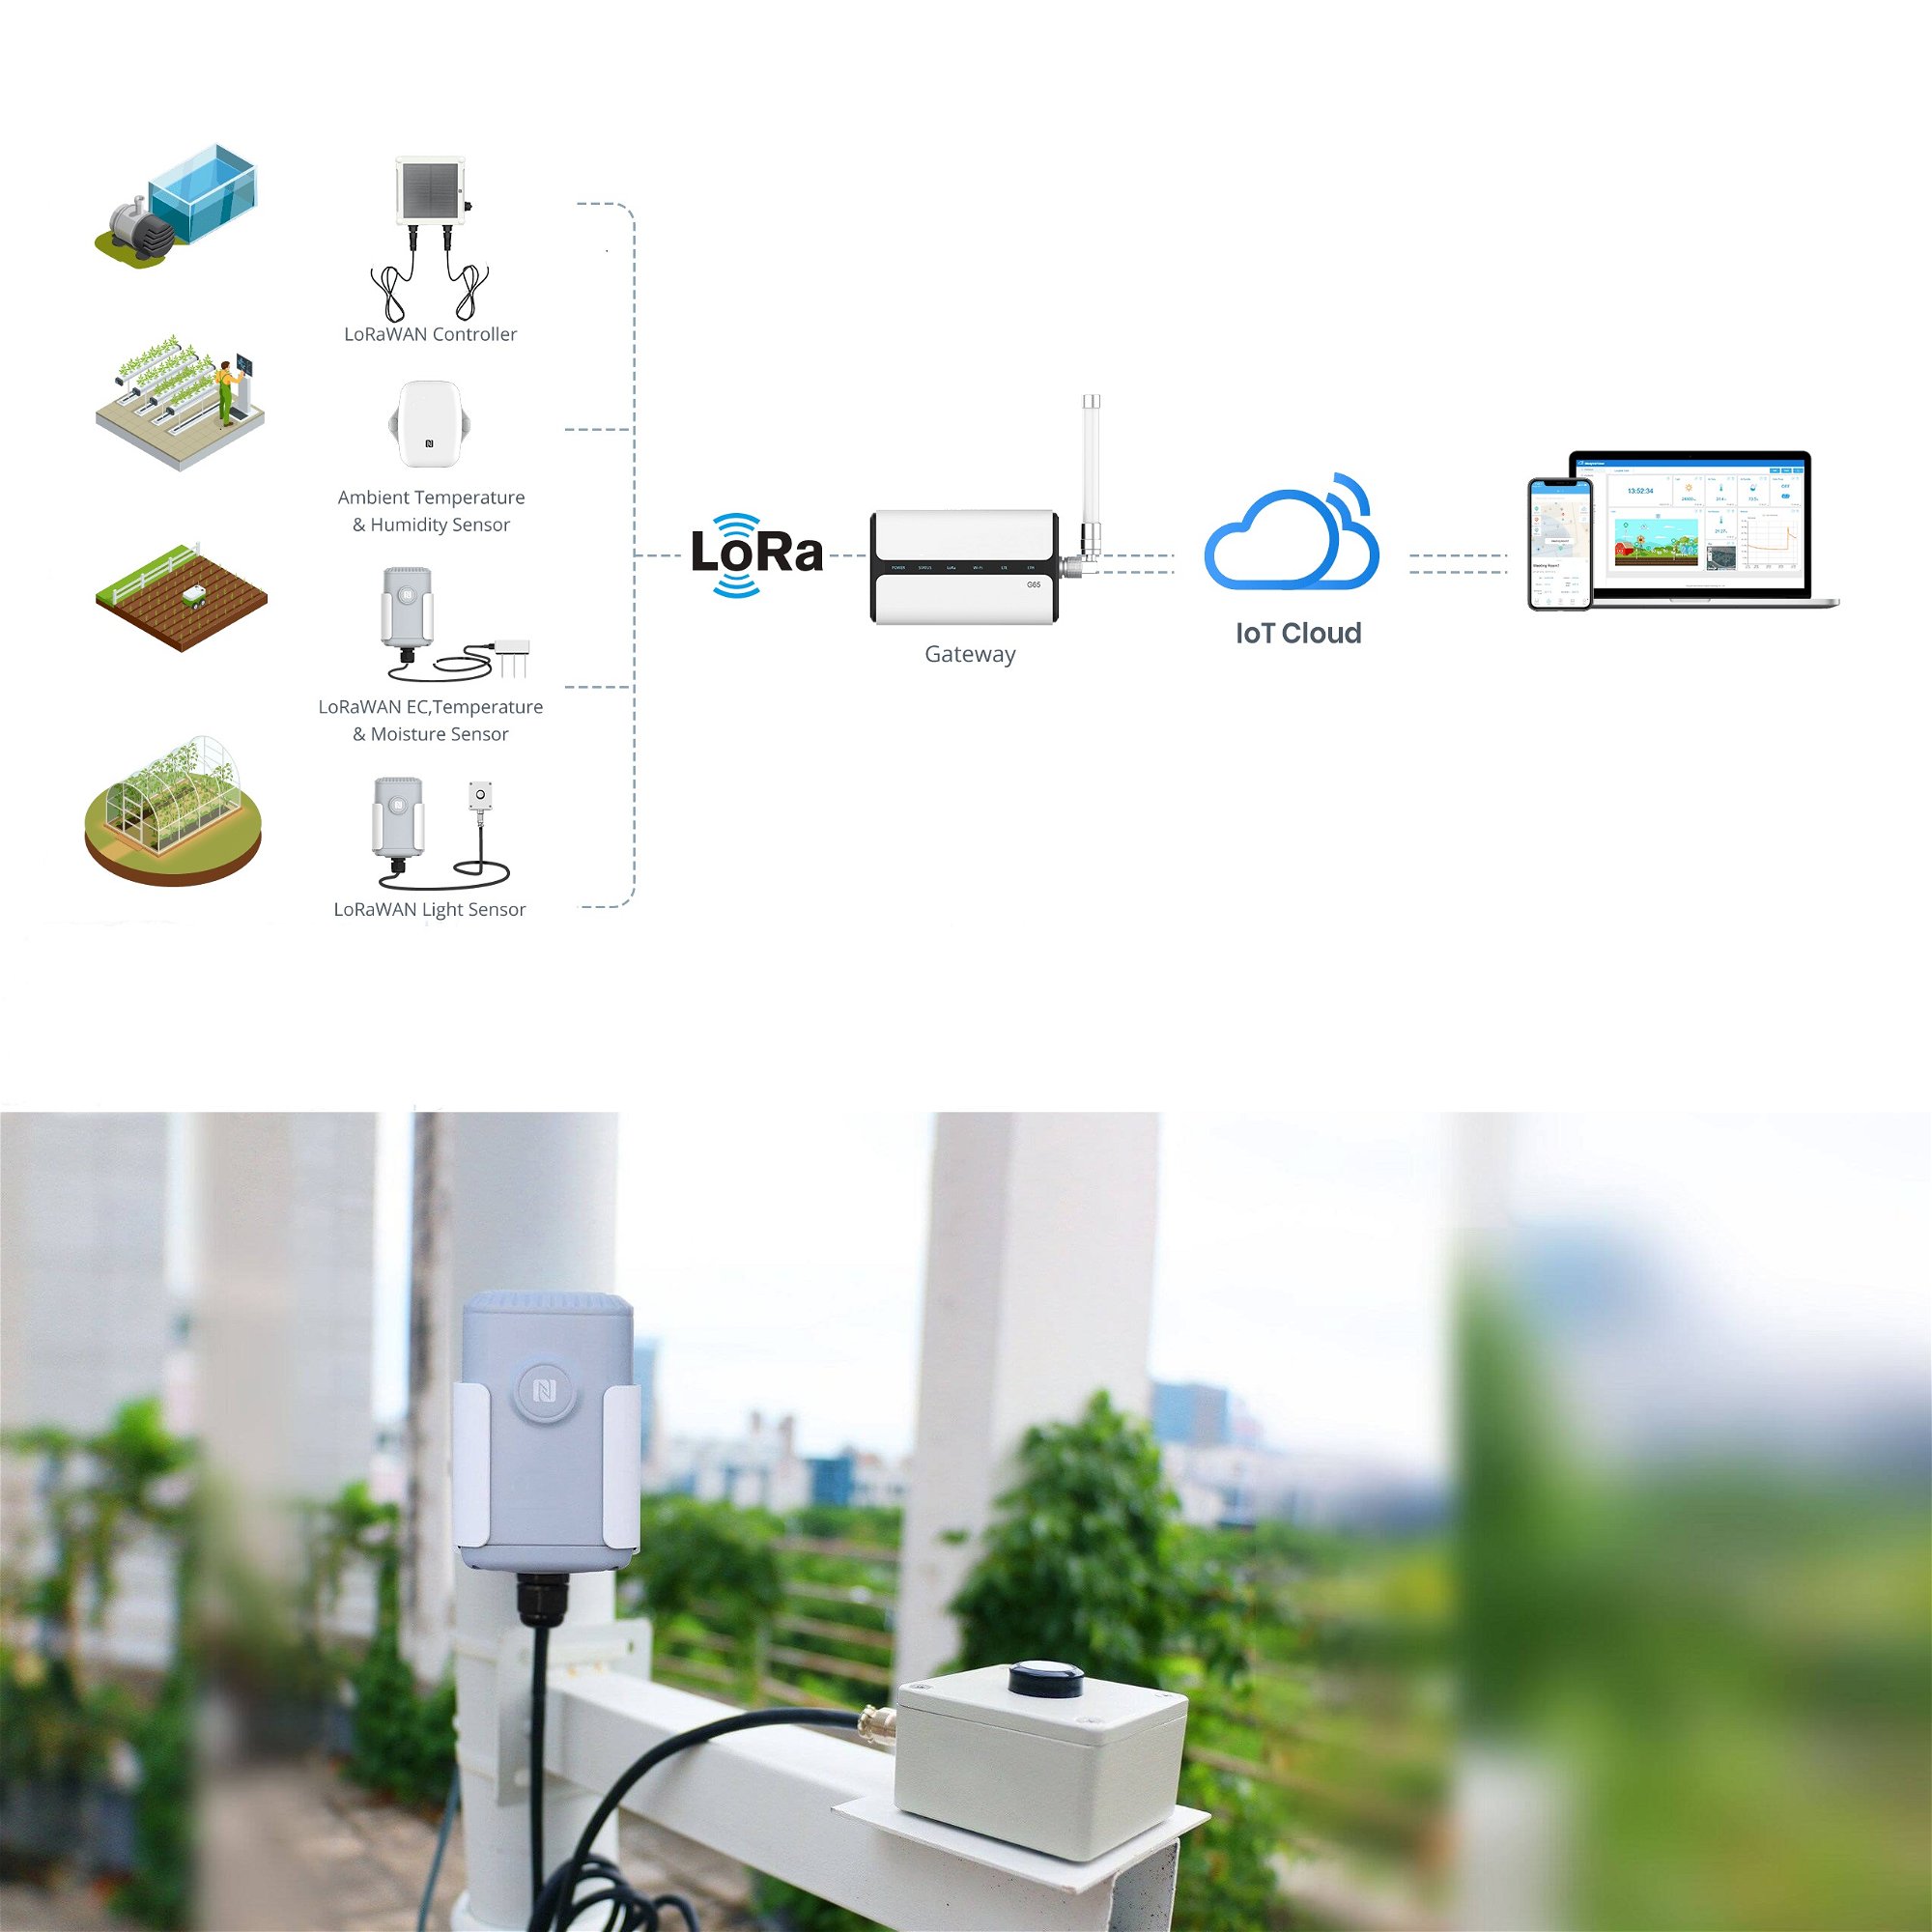 SMART AGRICULTURE SOLUTION